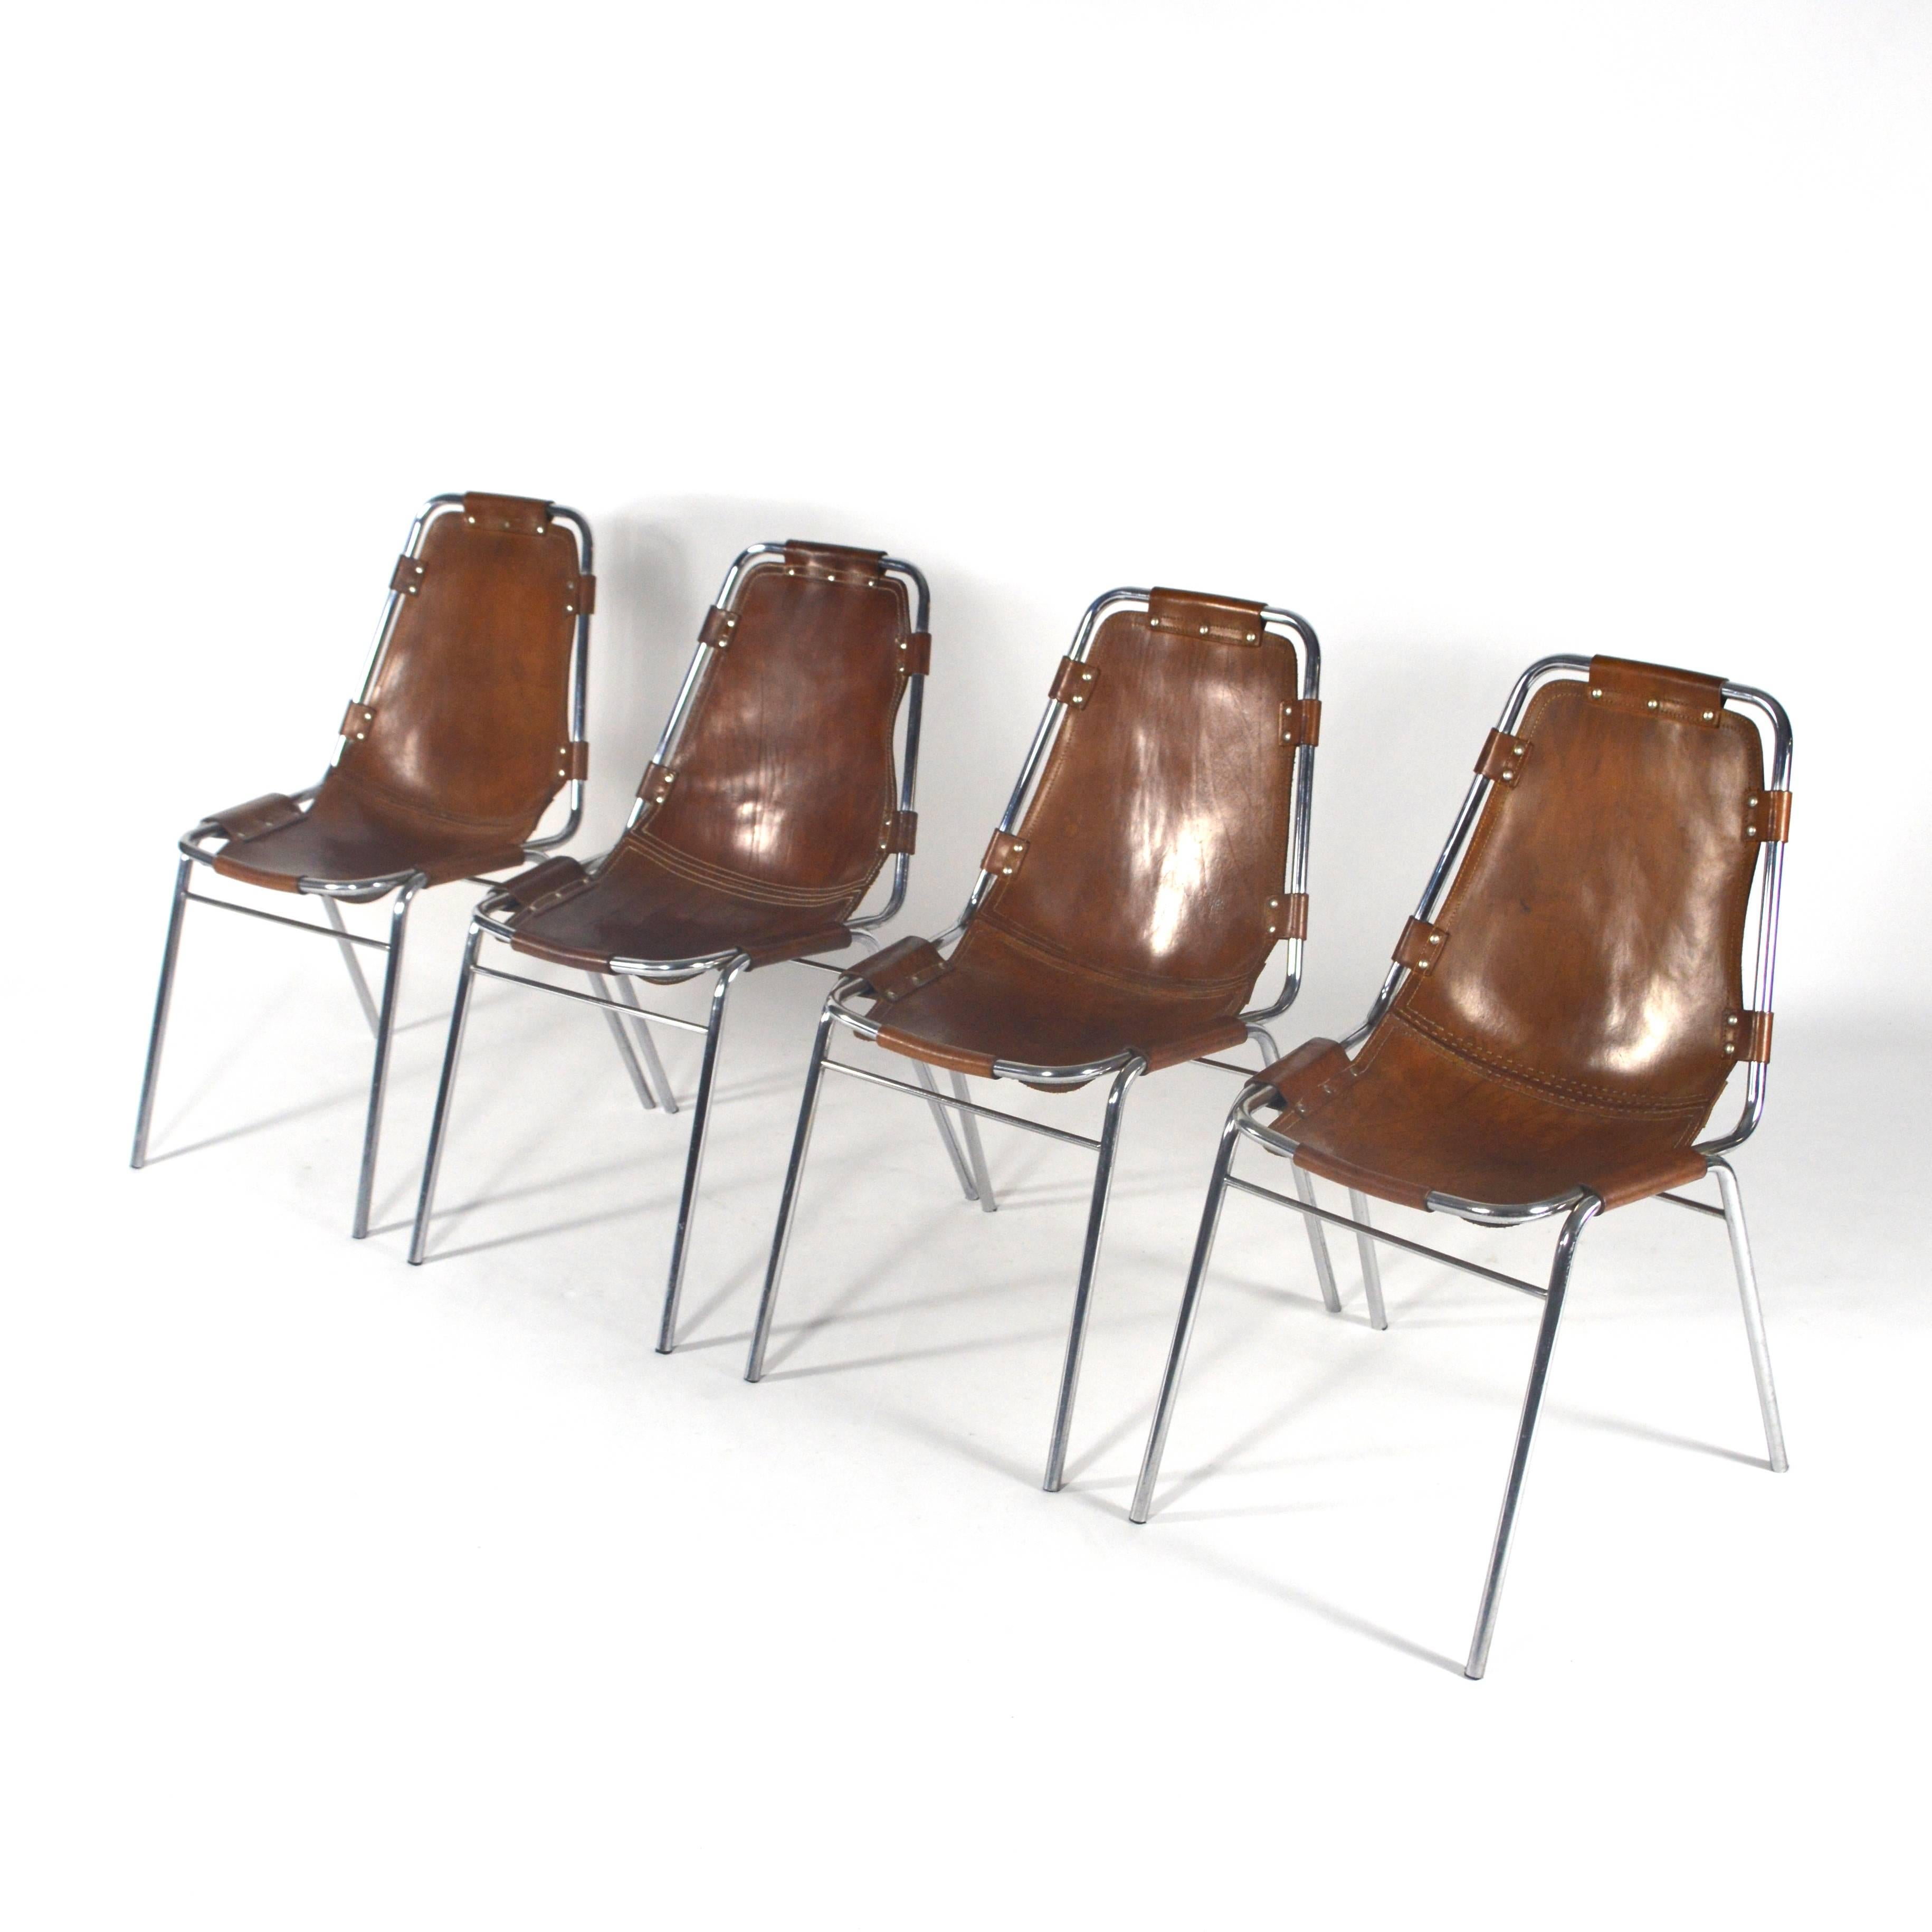 4 Charlotte Perriand Les Arc chairs.
In very good condition. One chair has restored stitching (if wanted we can have this done for all chairs). 
Nice patina to the leather.
Normal age related wear (no holes or tears in the leather).